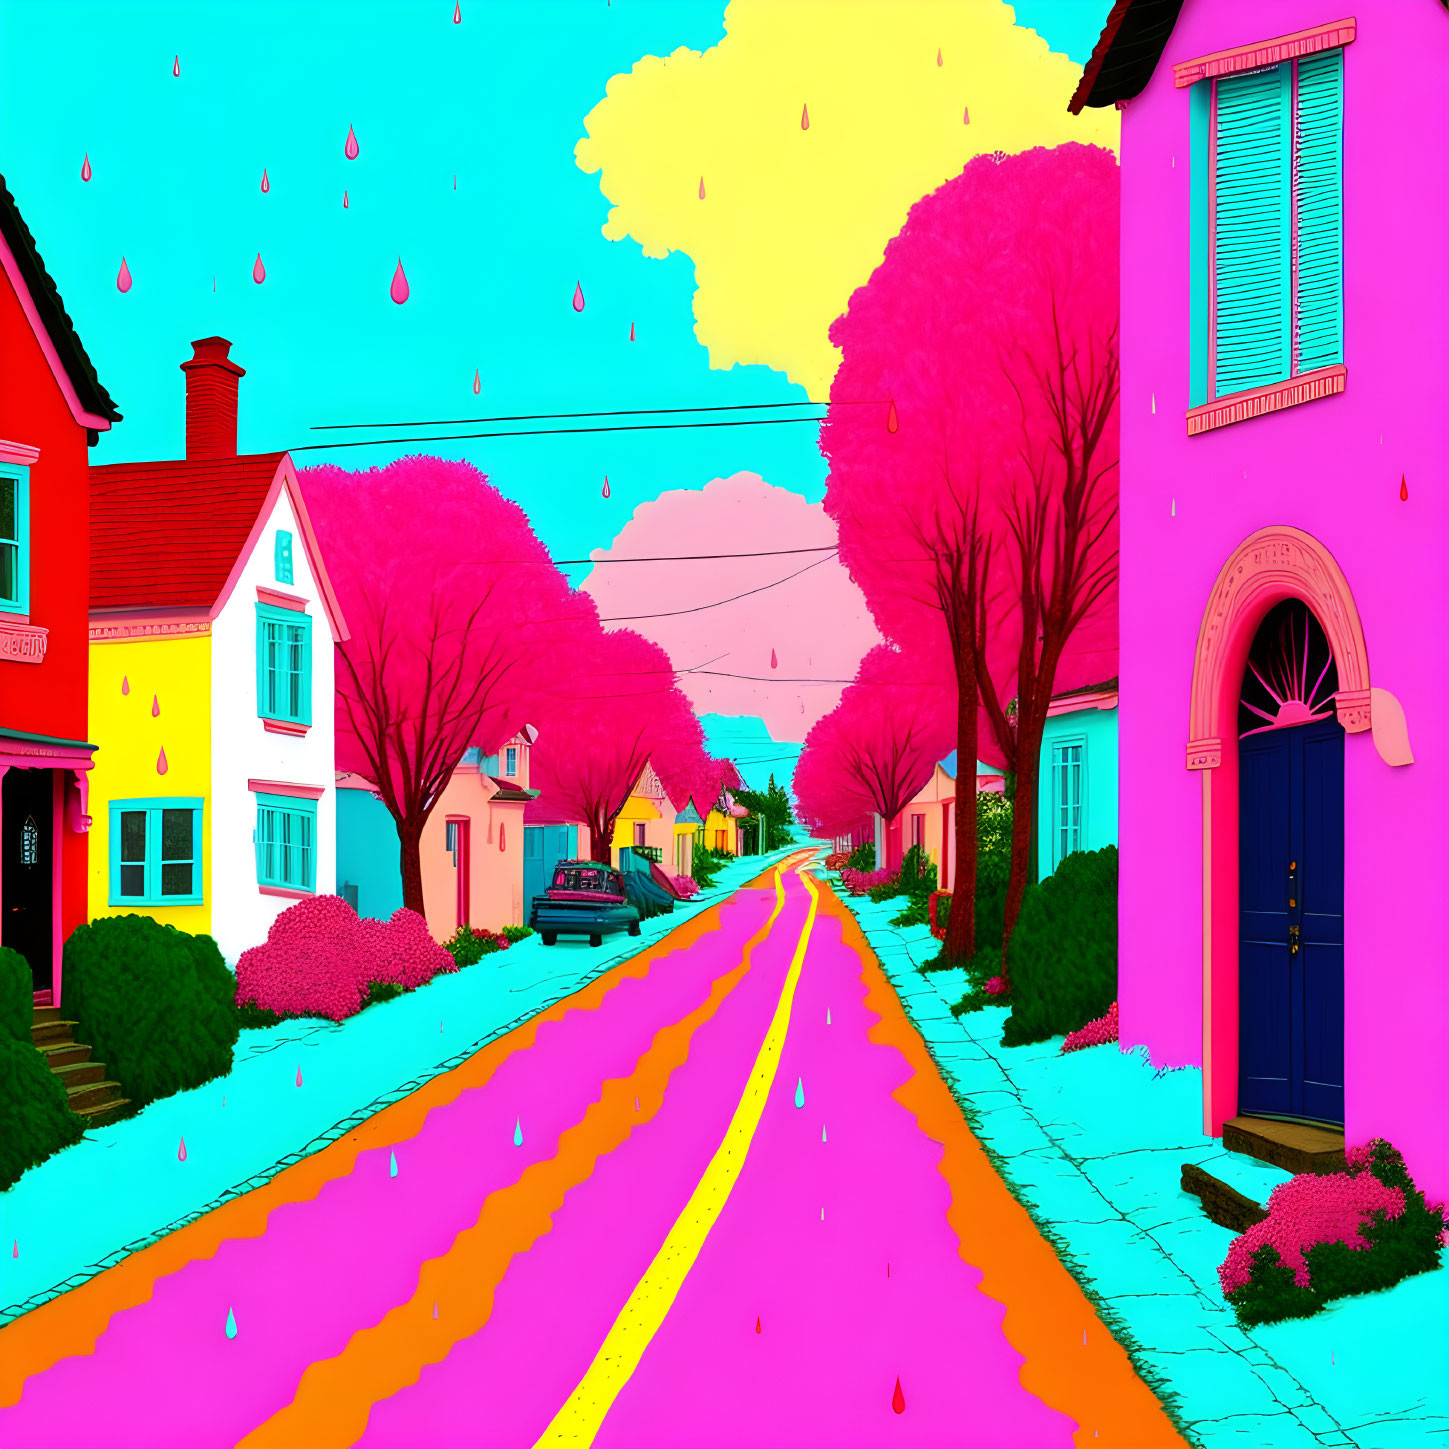 Colorful digitally altered street scene with pink trees, teal sky, neon houses, and yellow road in